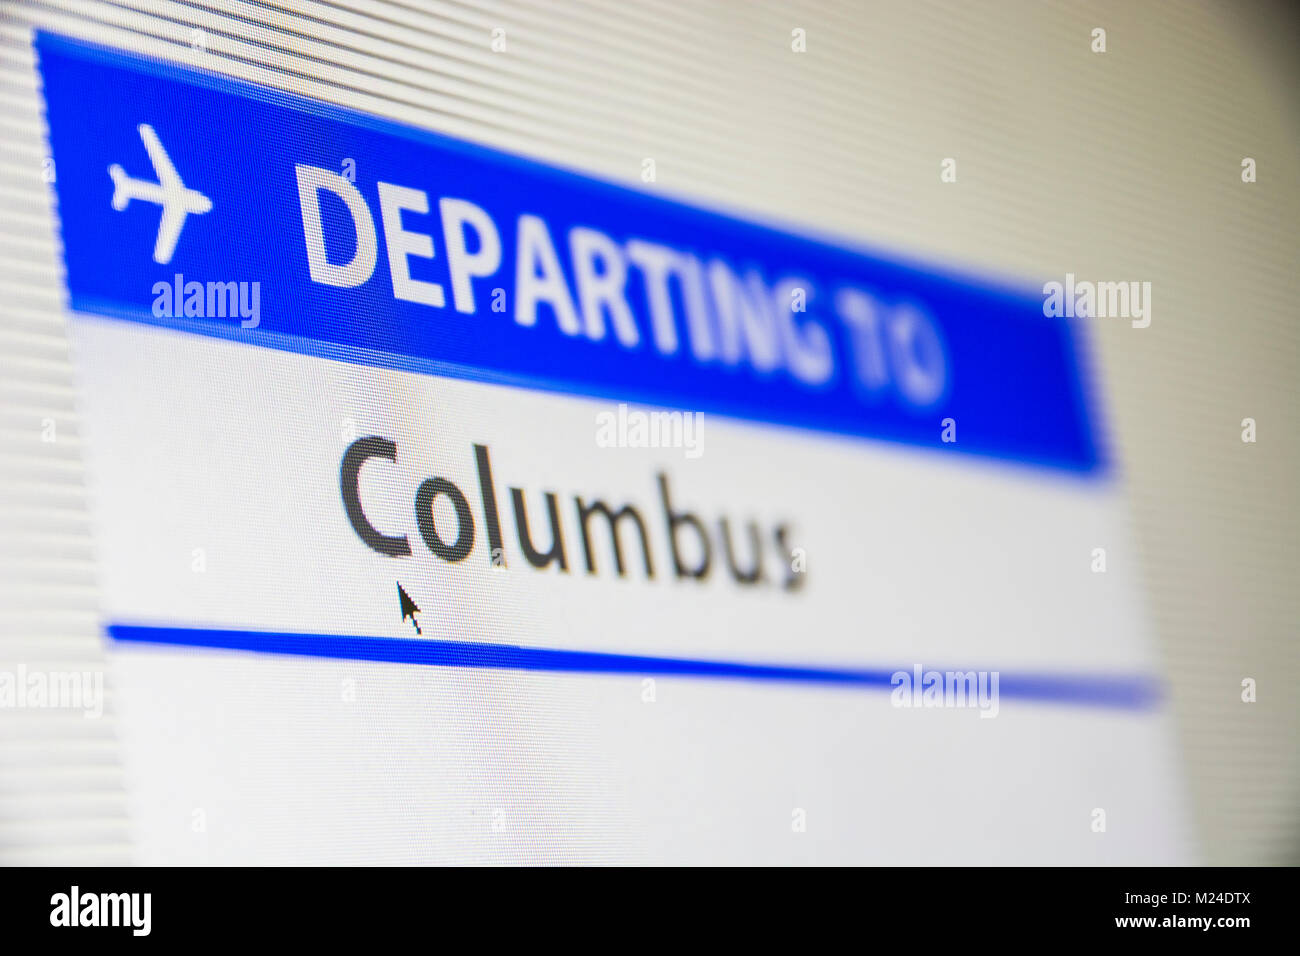 Computer screen close-up of flight to Colombus Stock Photo